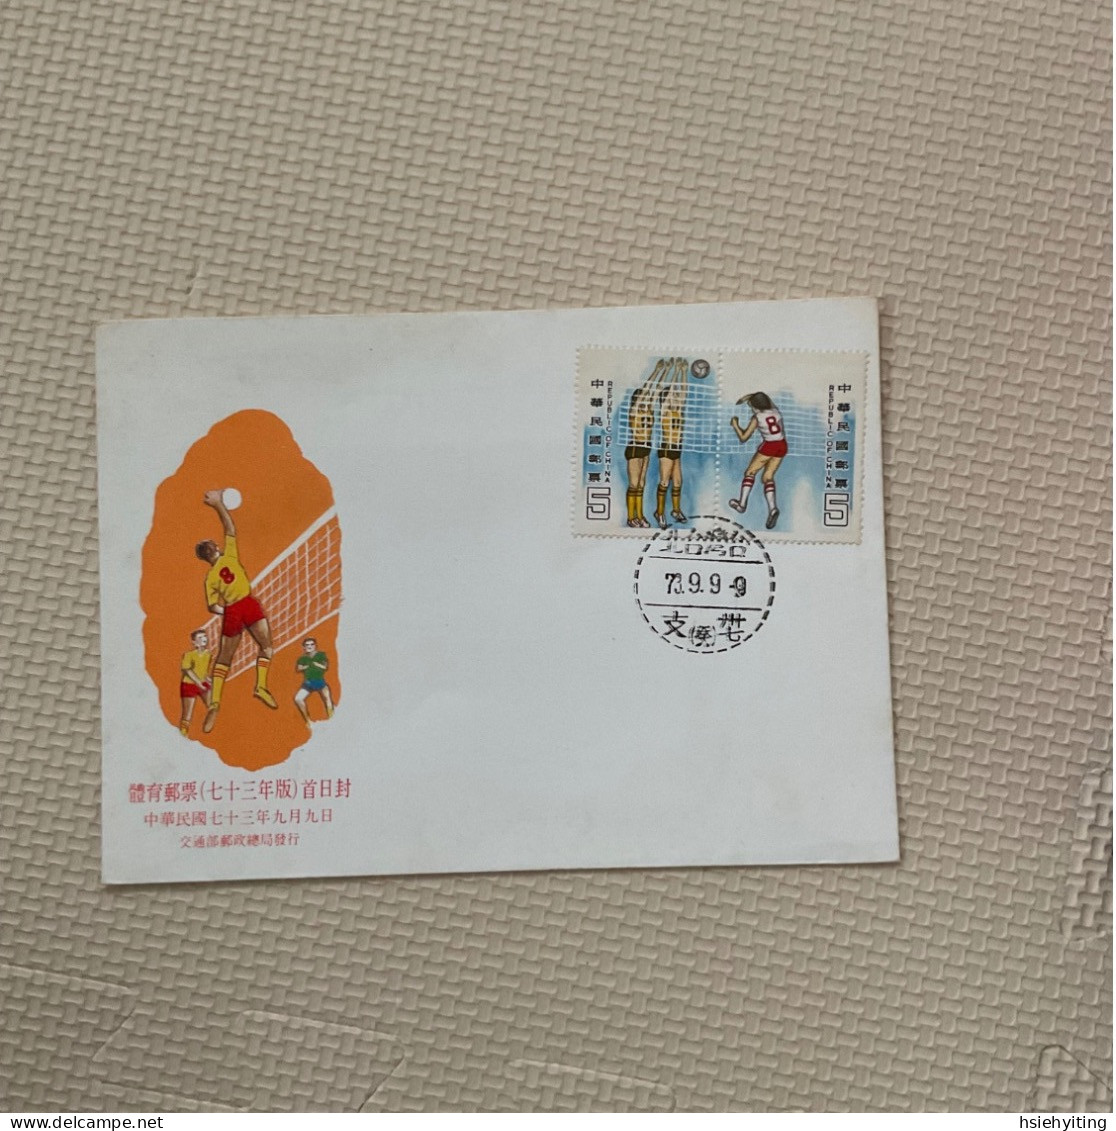 Taiwan Postage Stamps - Volleybal